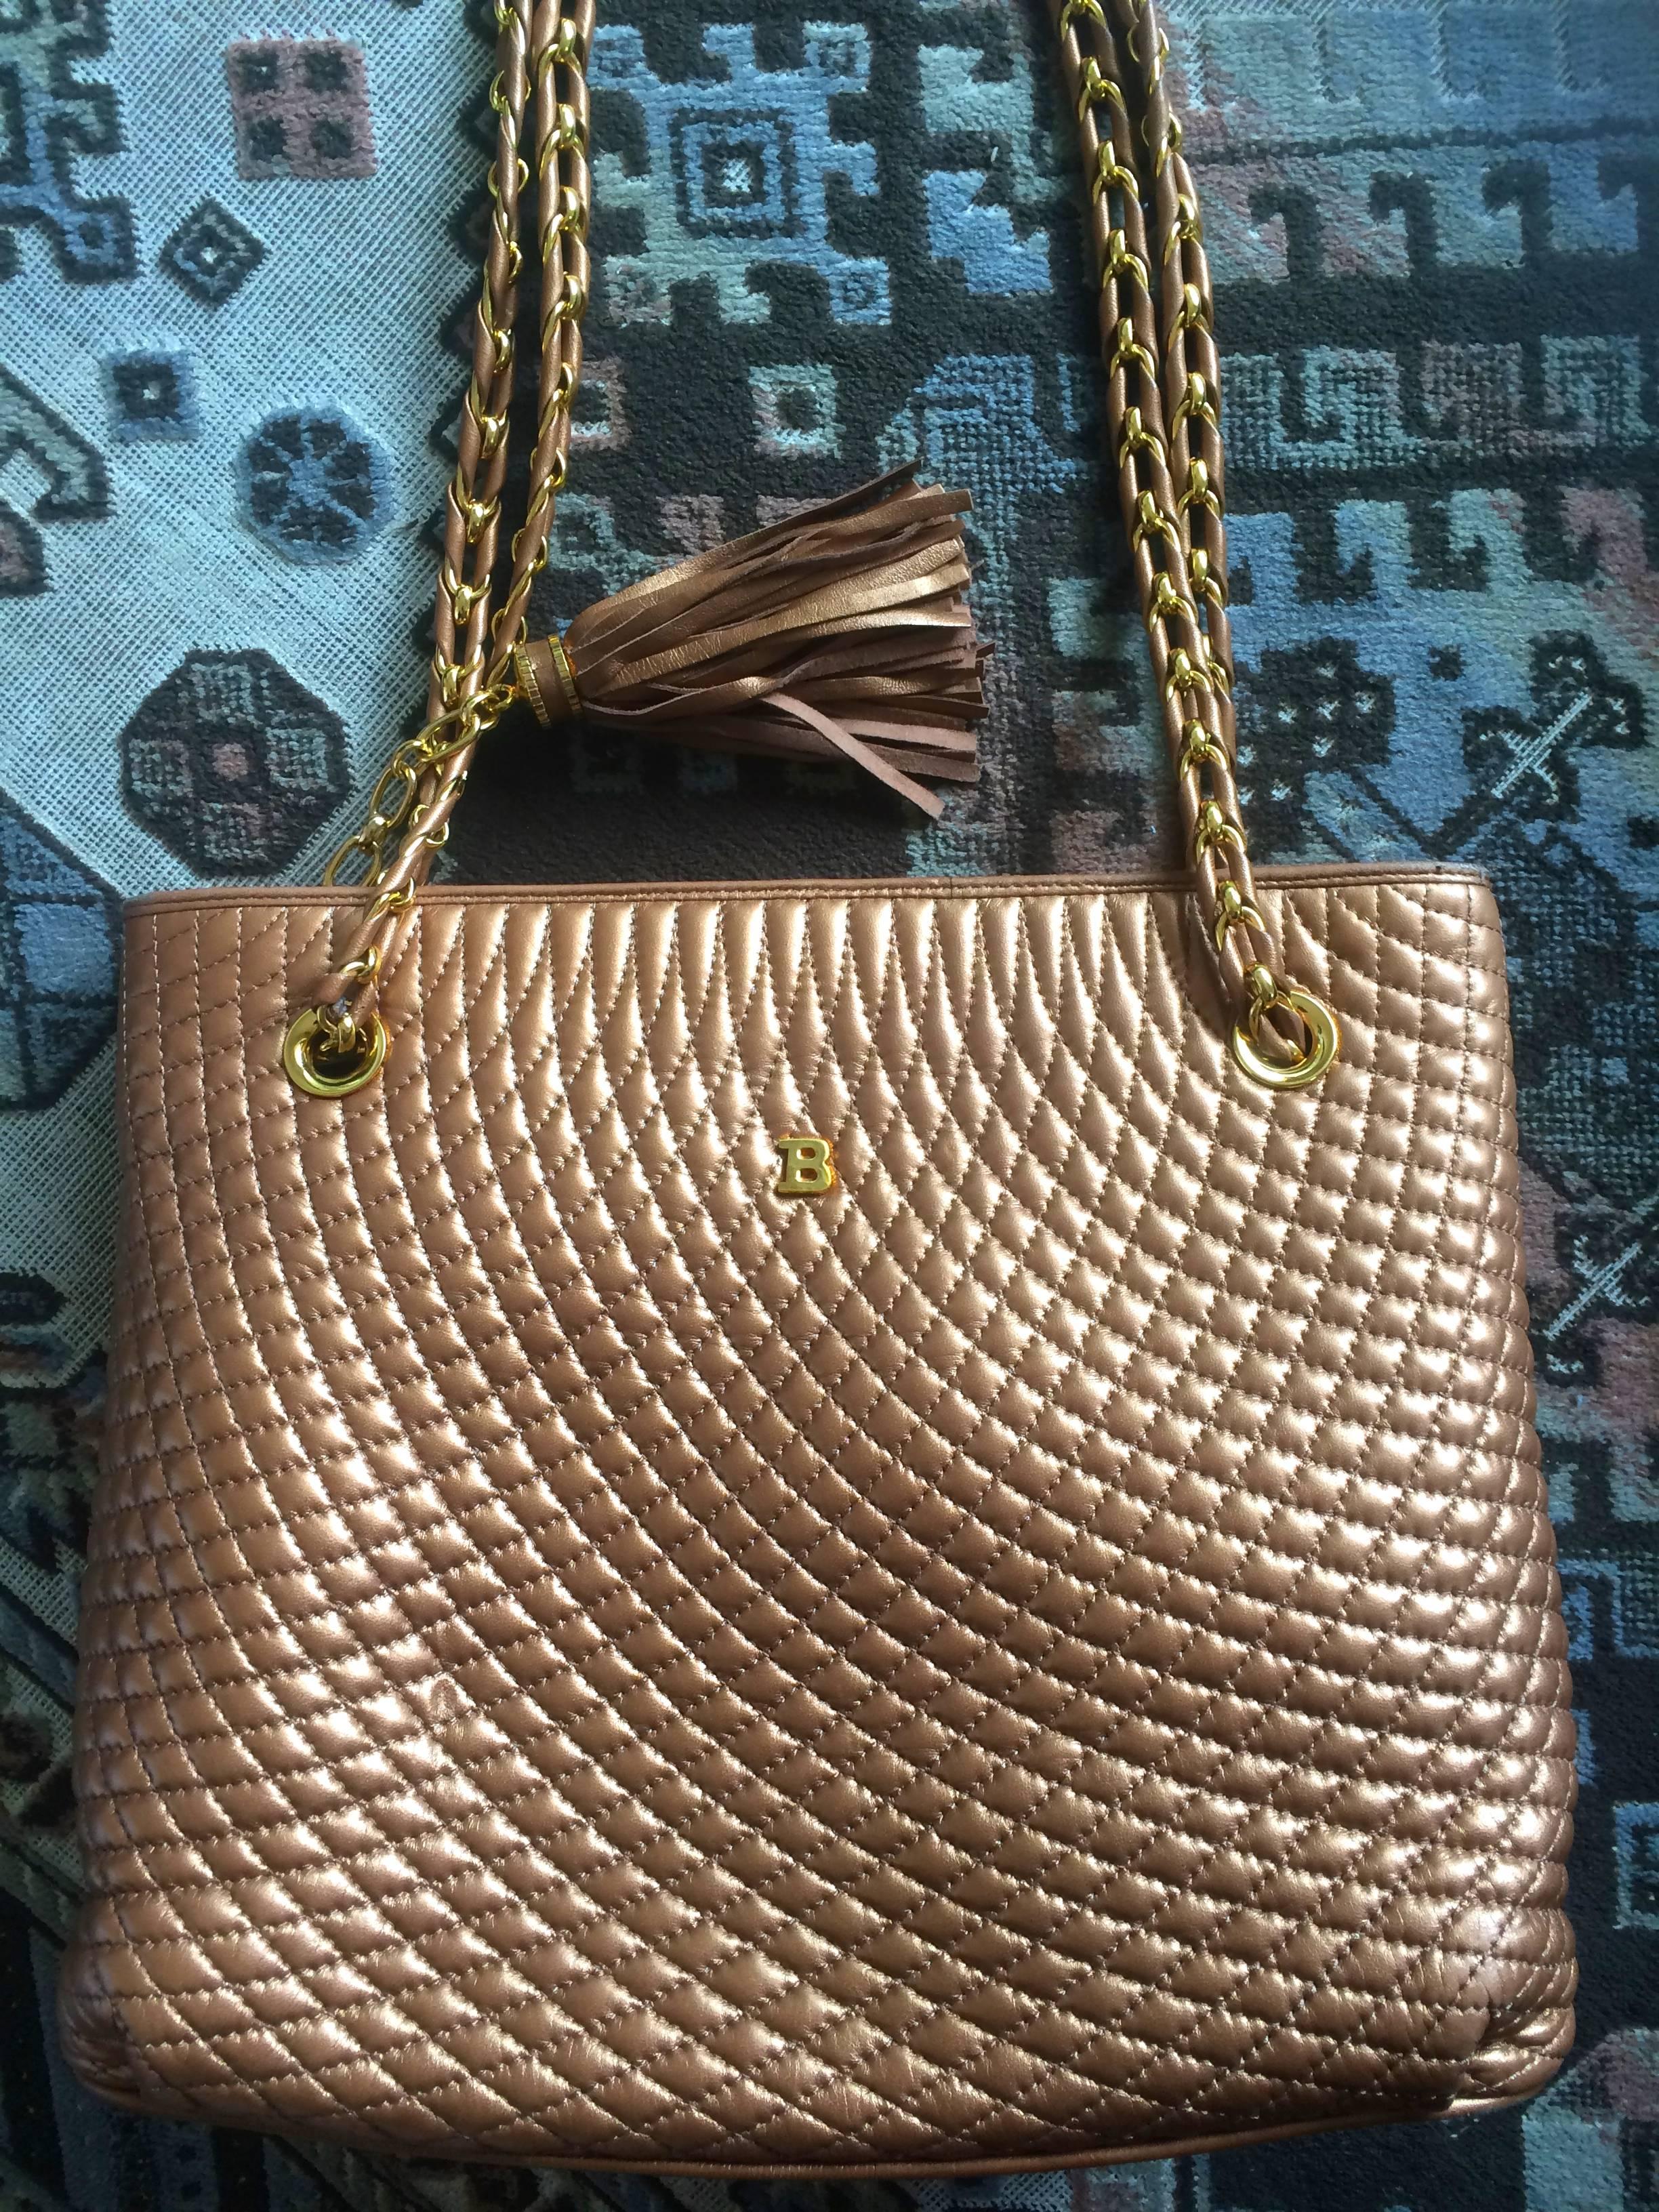 1990s. Vintage Bally bronze brown quilted leather tote bag with chain straps and a matching tassel to the zipper. Golden B logo motif.

Introducing a classic vintage chain shoulder tote bag from BALLY back in the 90s.
Rare color in brown